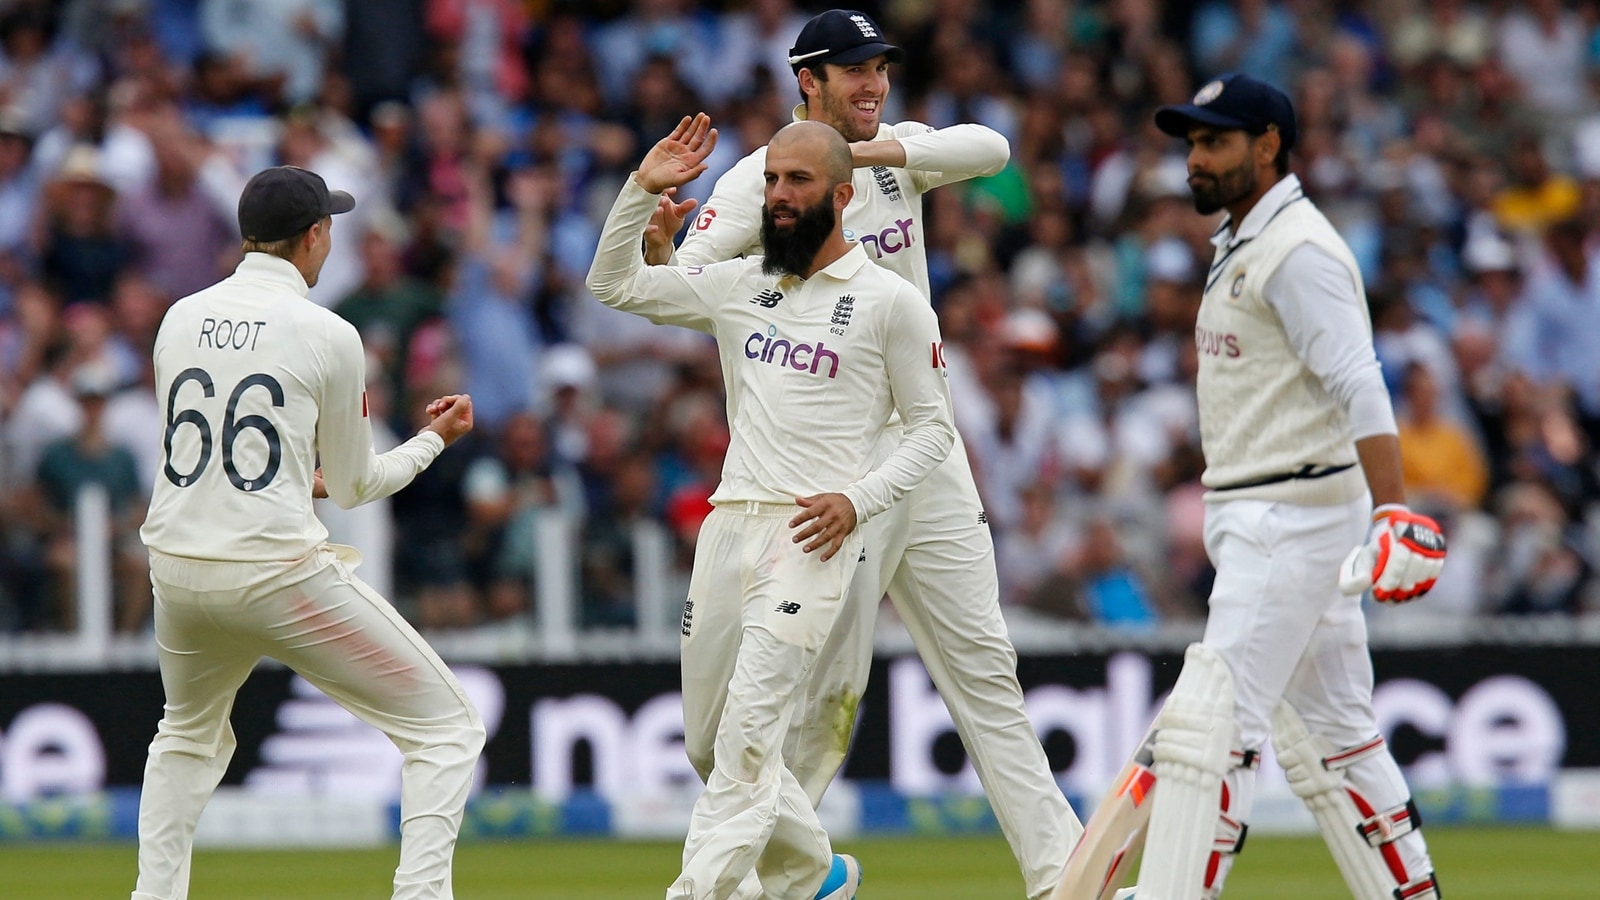 India vs England Highlights 2nd Test Day 4 India 181/6 at stumps, lead